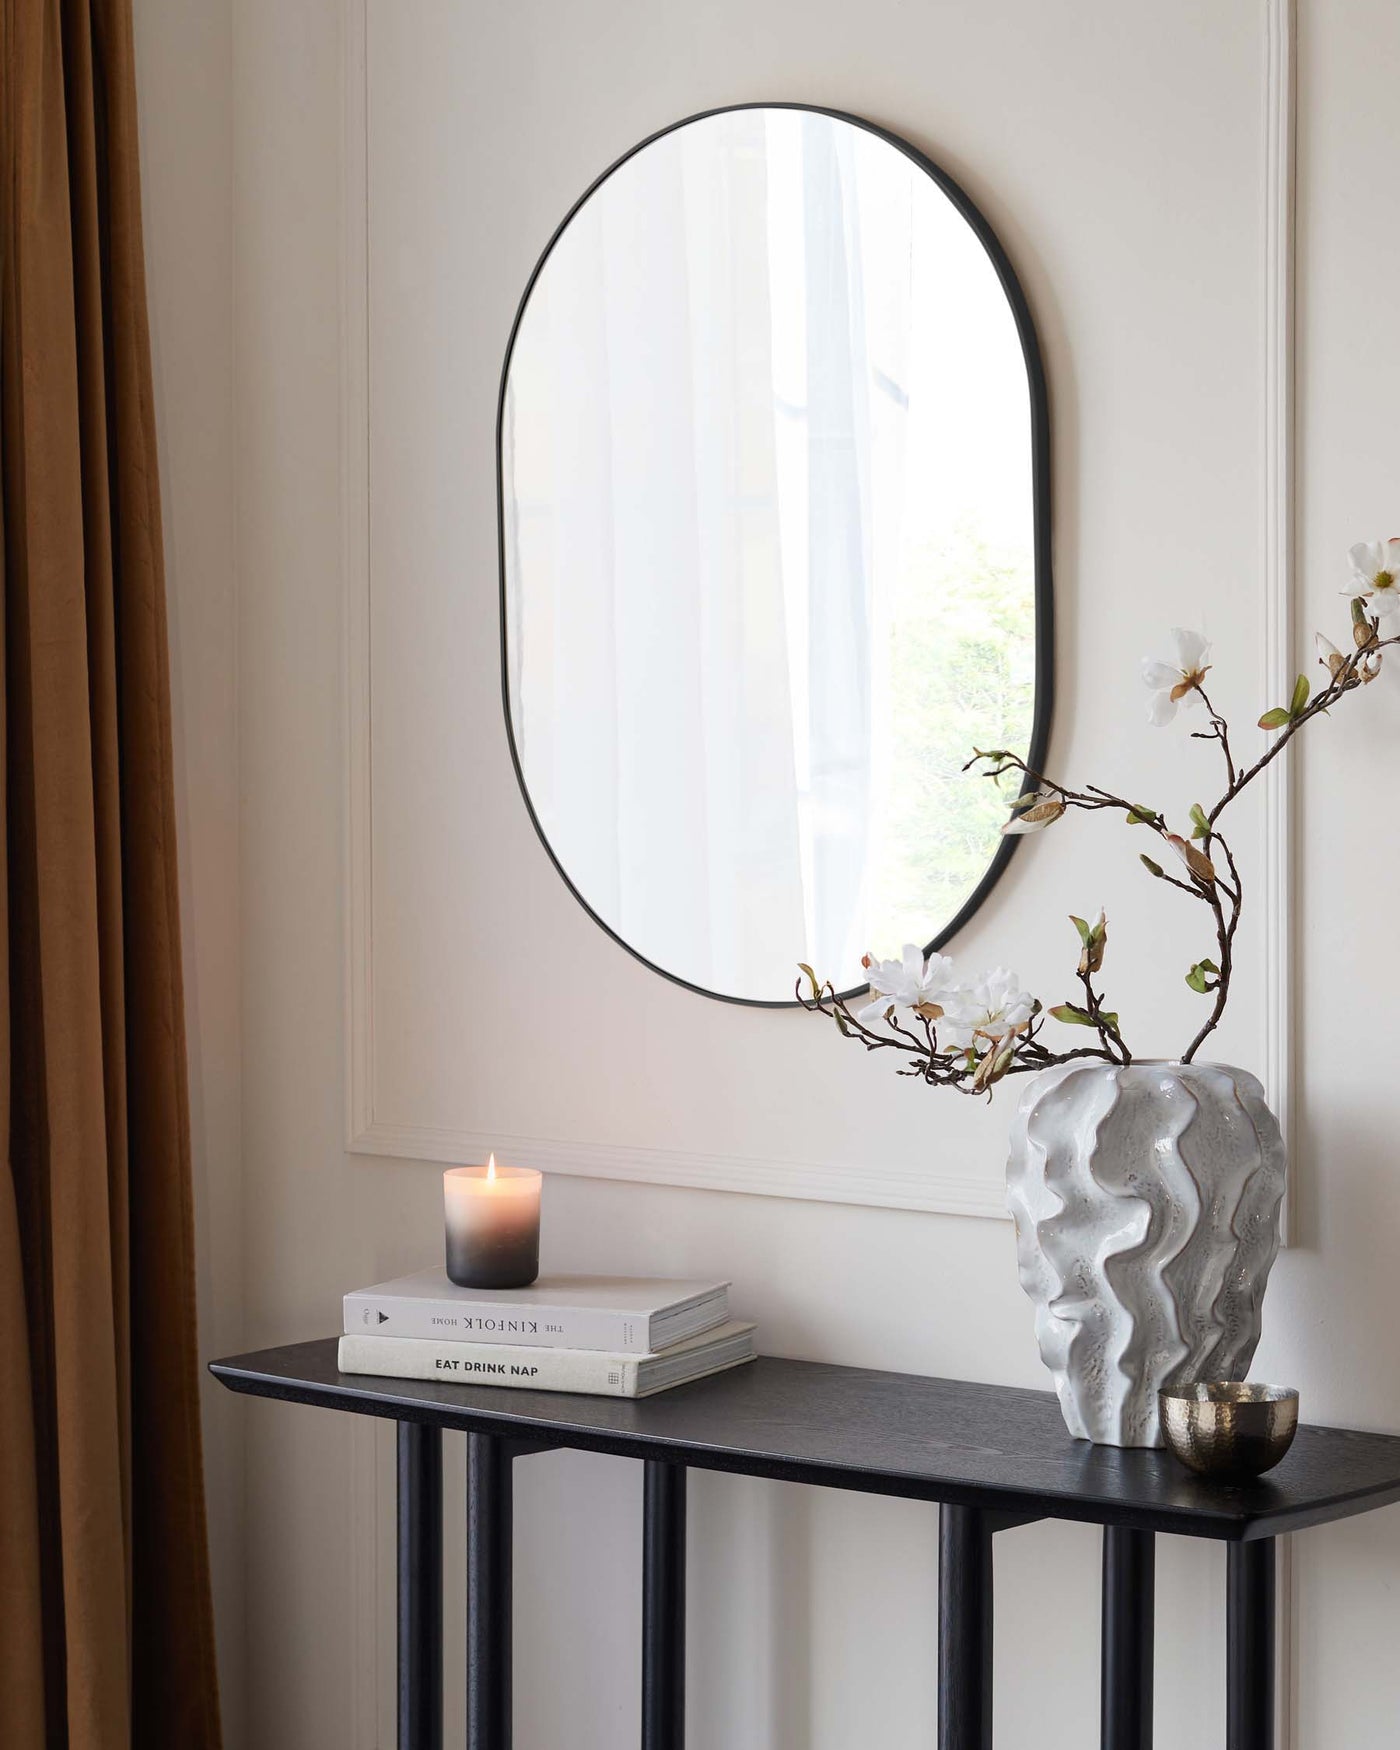 A contemporary console table with a dark grey, textured surface, and a minimalist black metal frame featuring straight lines and right angles. The table is accessorized with books, a lit candle, and a sculptural white vase with flowering branches. A round mirror with a thin black frame hangs above the table against a neutral wall, enhancing the modern aesthetic.